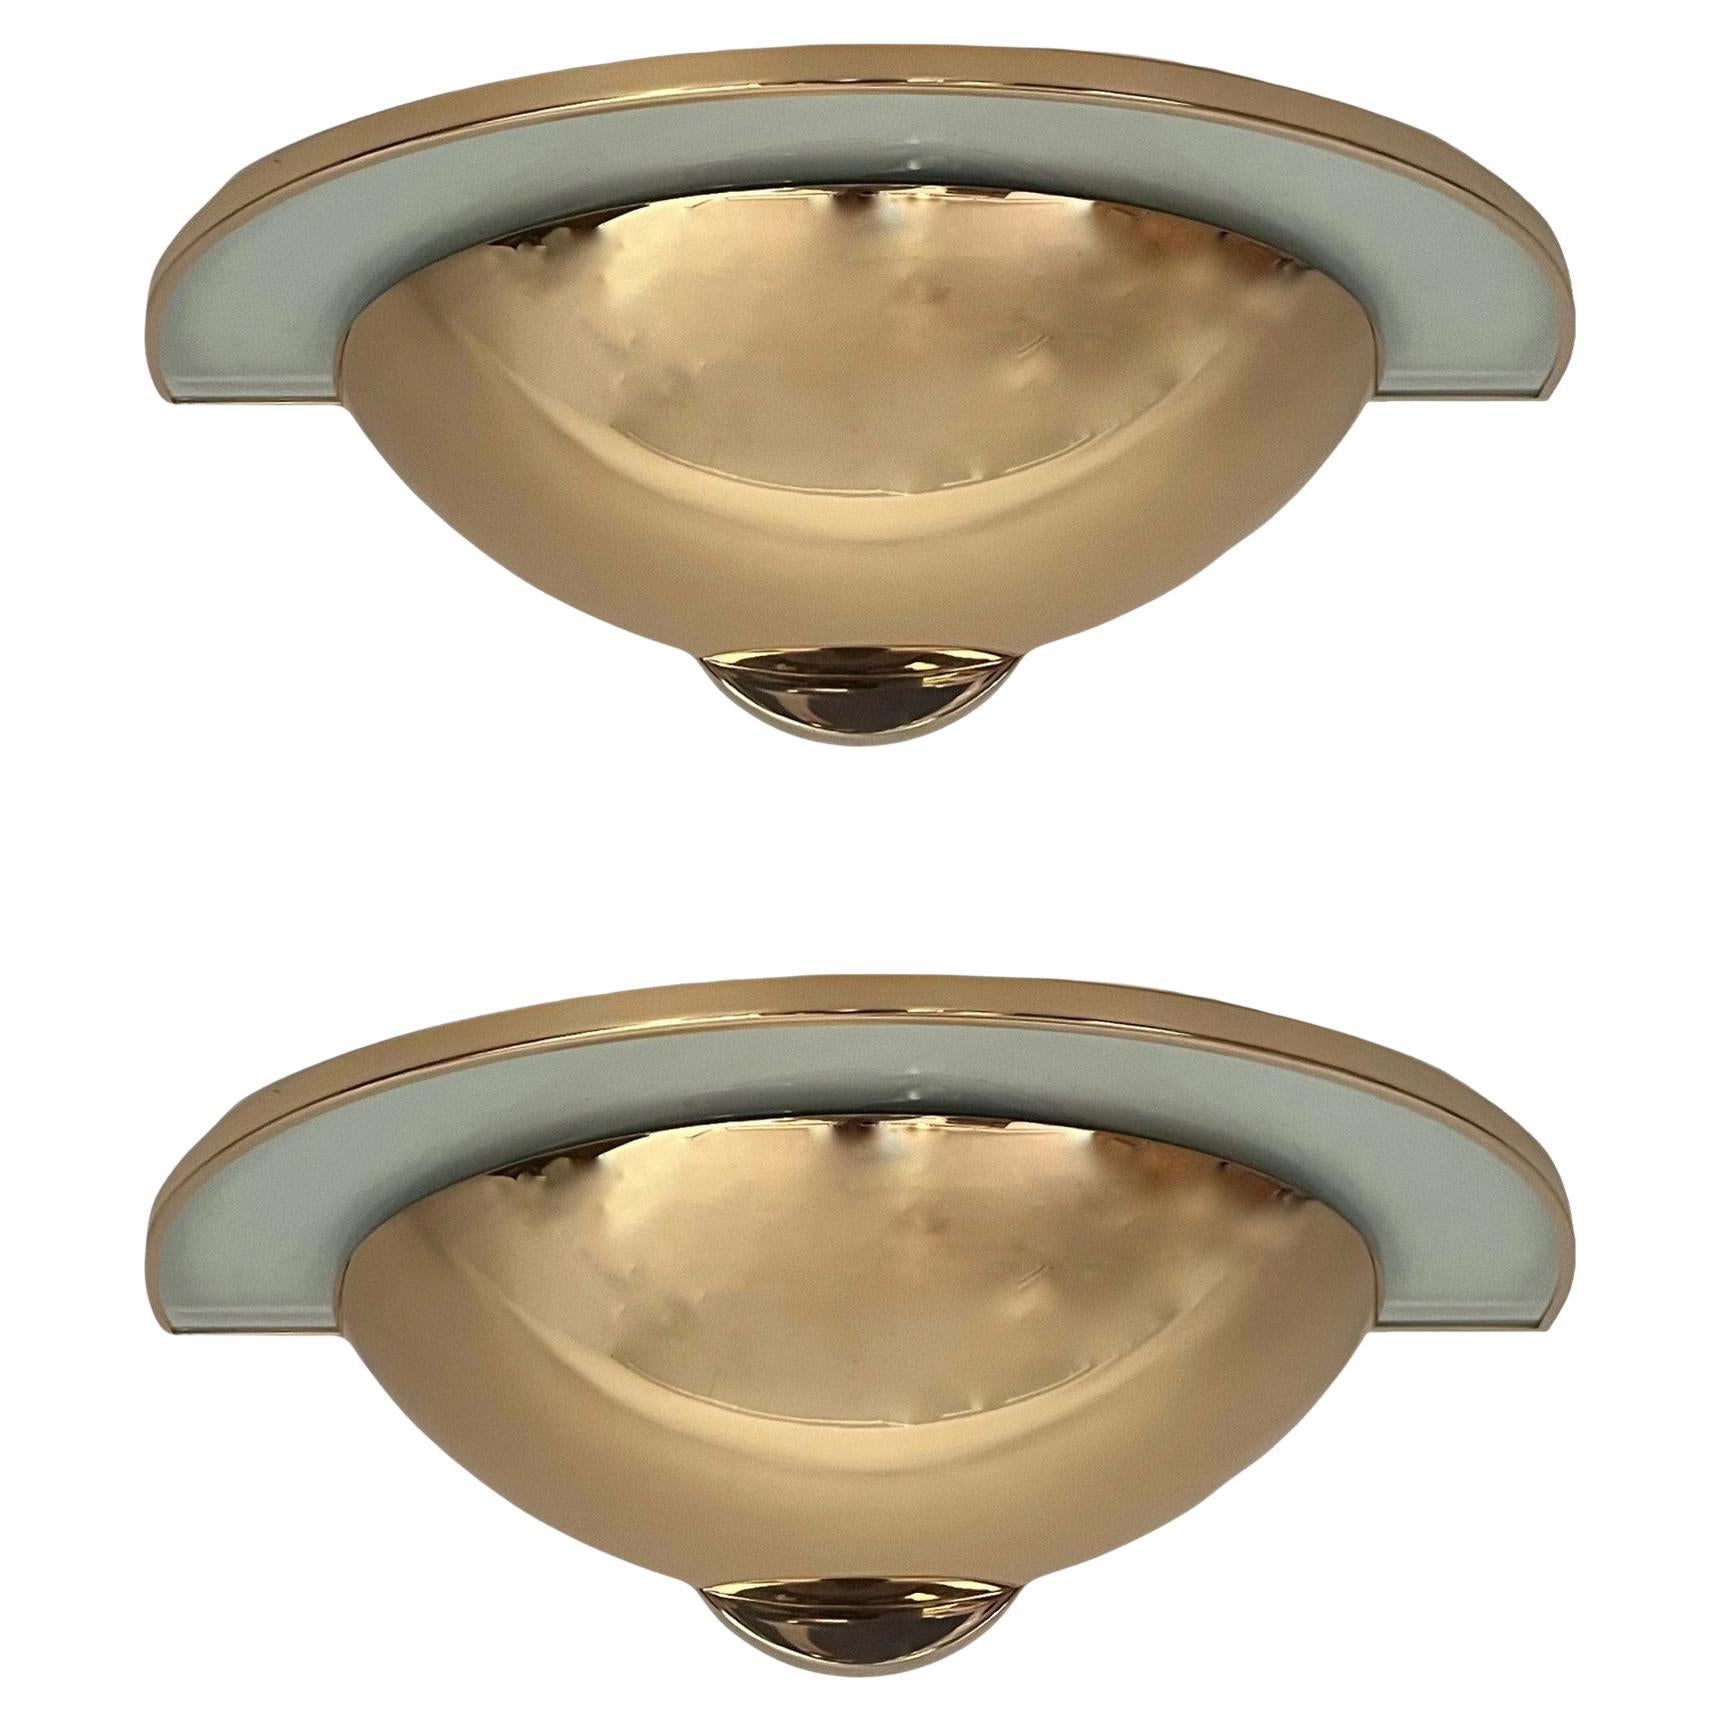 Postmodern Gold Pair of Wall Sconces by Estiluz, Barcelona, 1980s For Sale